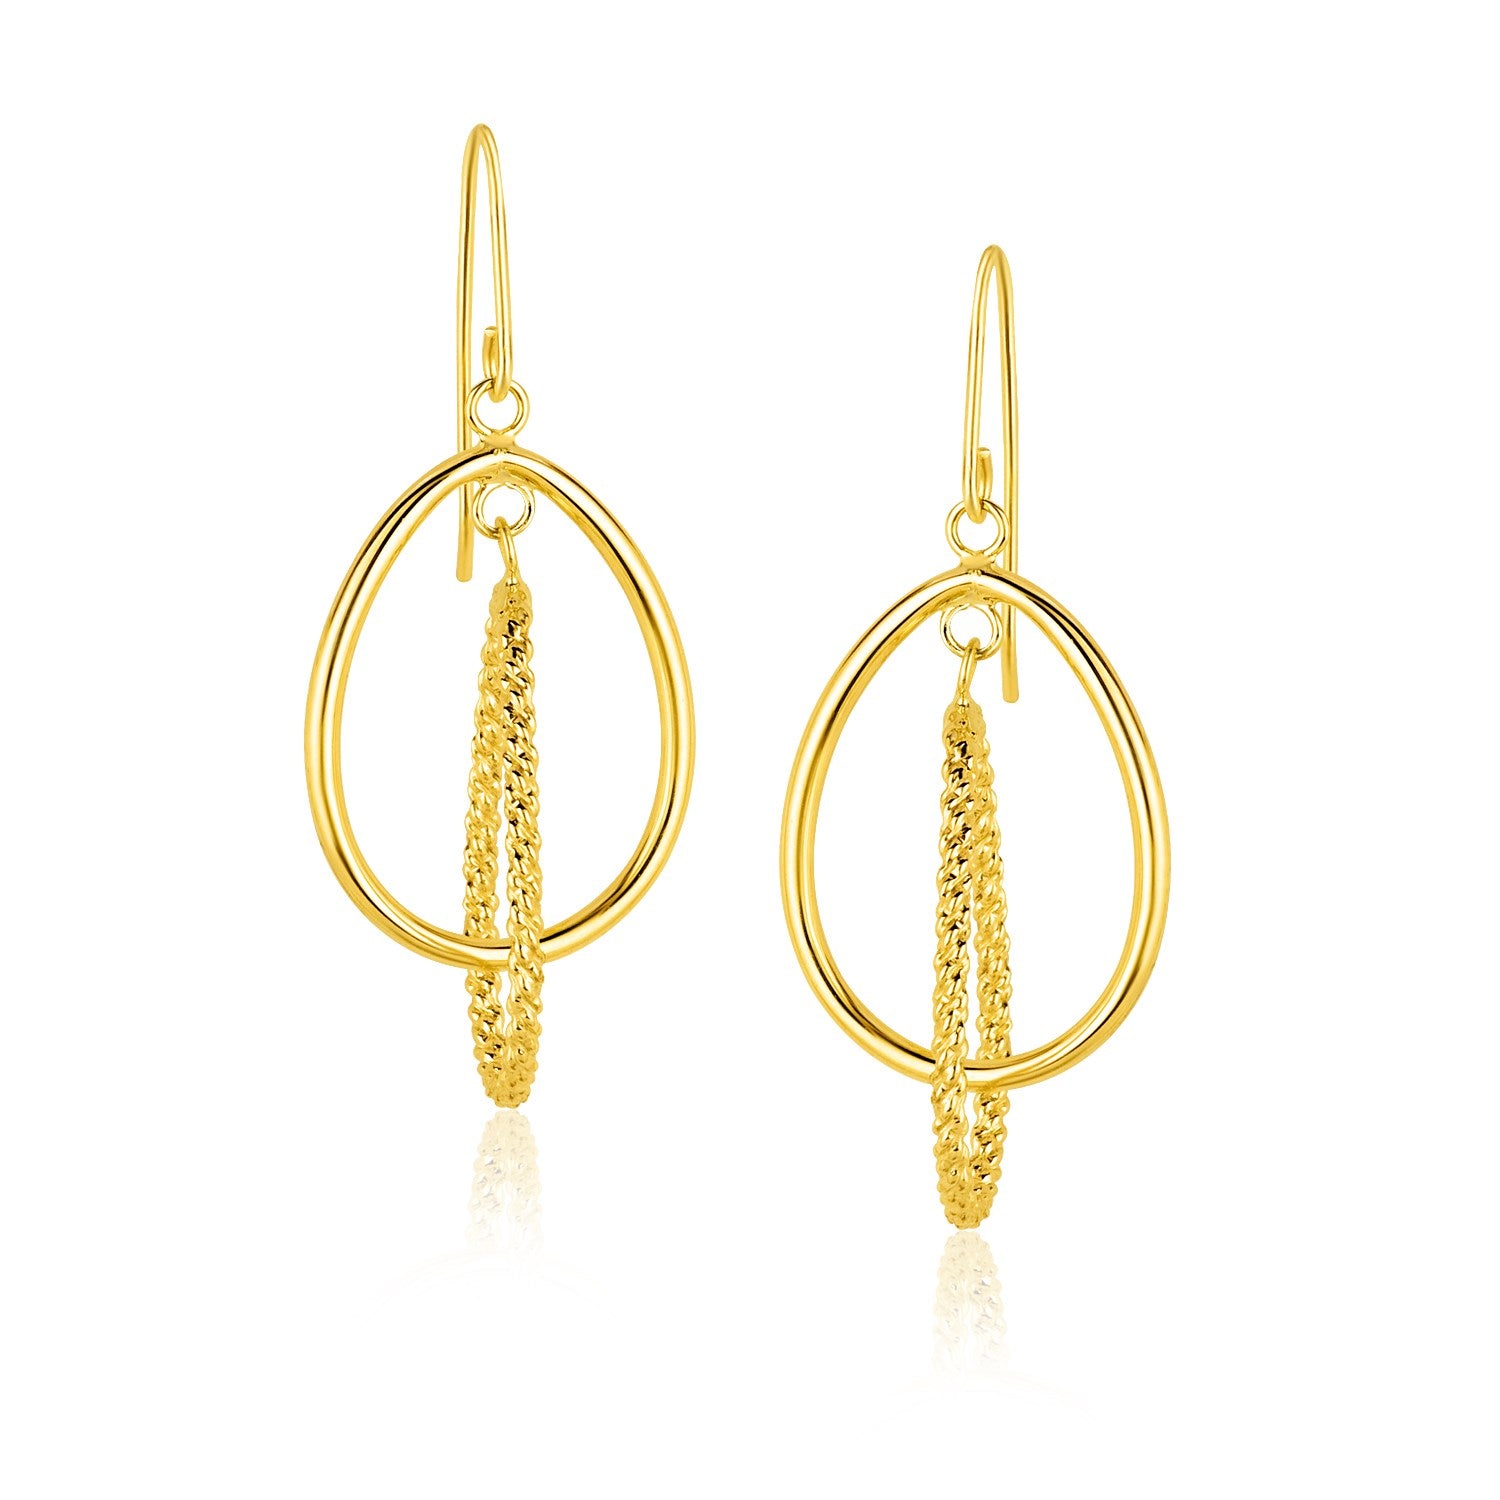 14k Yellow Gold Dangling Earrings with Teardrop and Textured Rows